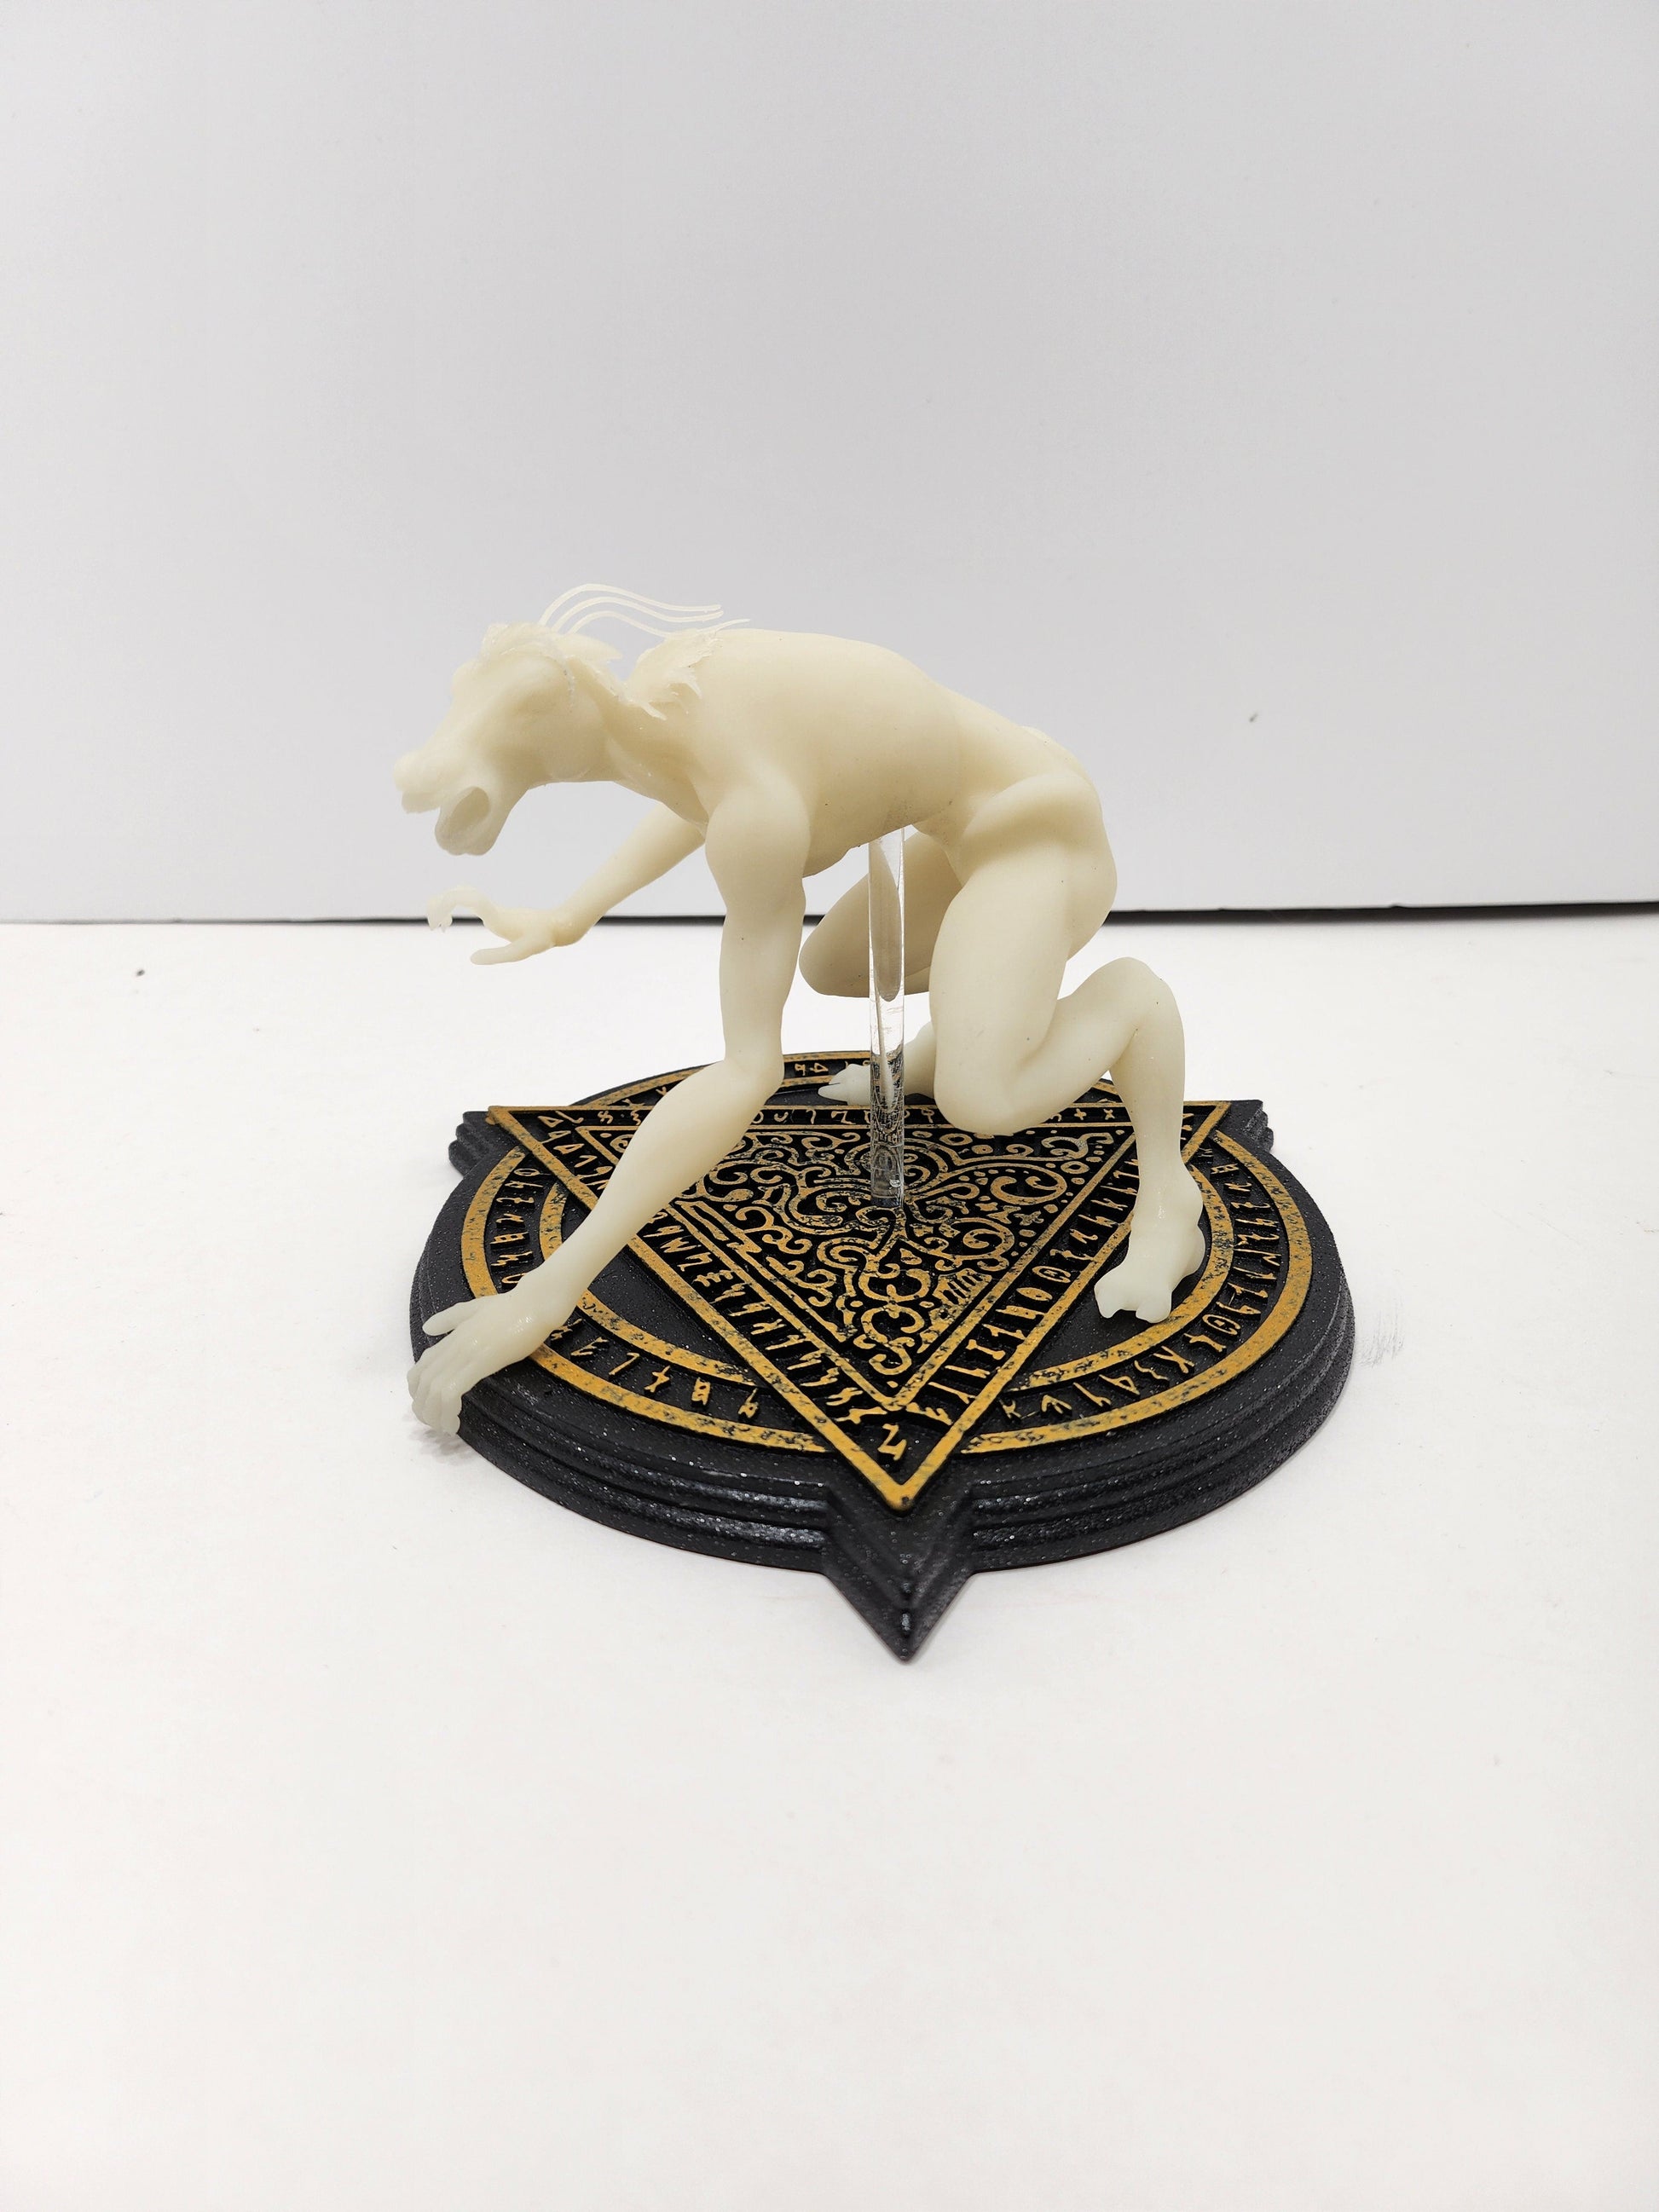 3D Printed Glow-in-the-Dark Tikbalang - Unleash the Mythical Horror! - Spectral Ink Shop - Figurine -SIP-F-TIK-GLOW